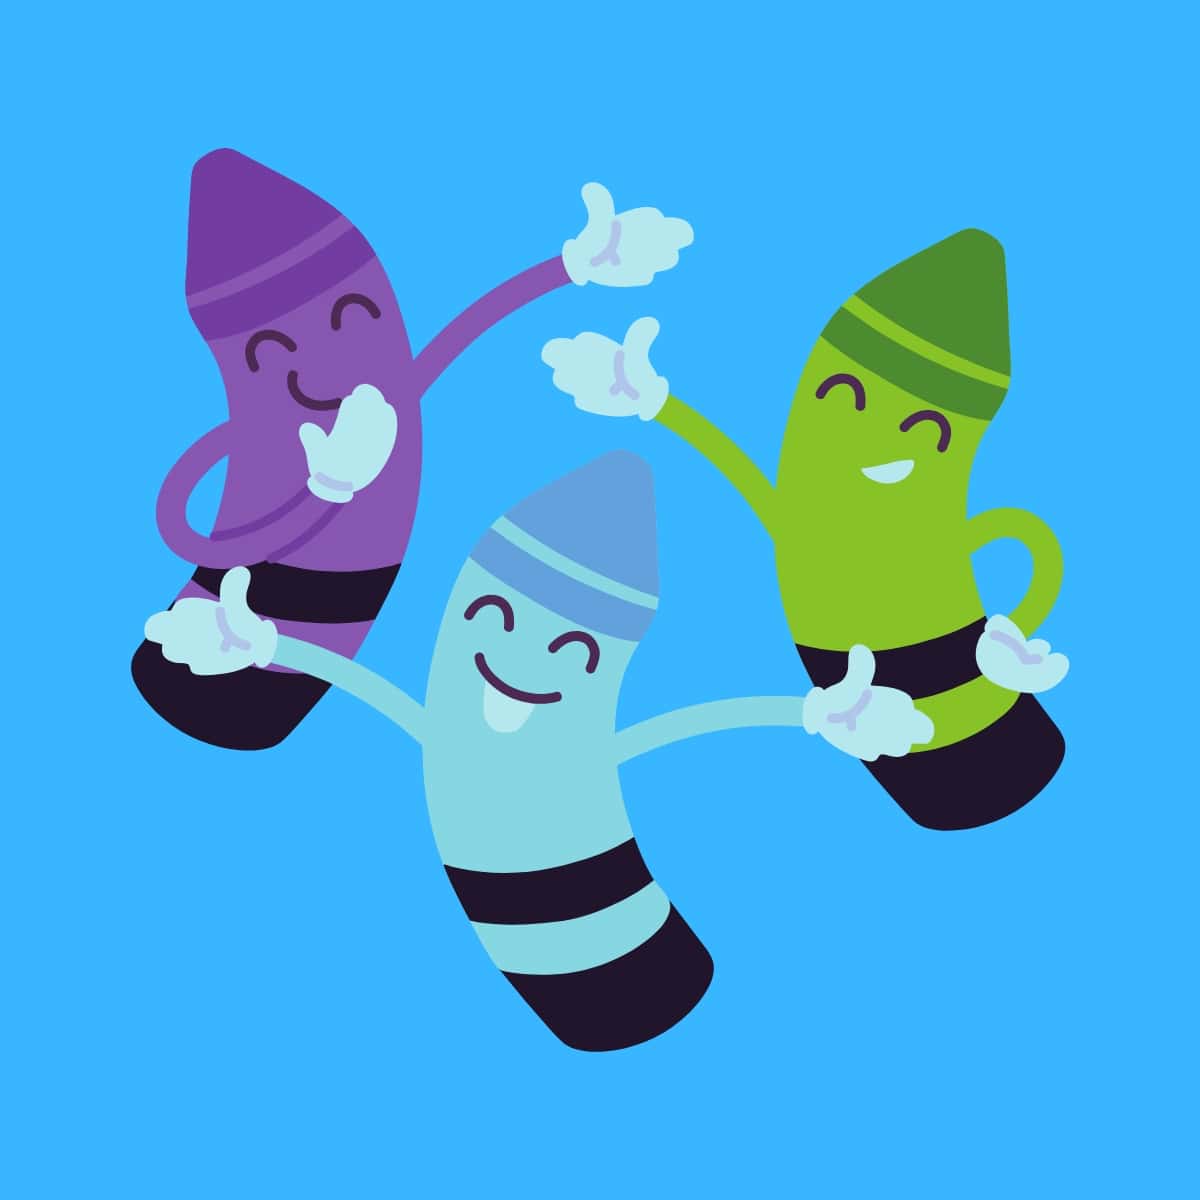 Cartoon graphic of 3 different color crayons smiling and with their arms and hands outstretched on a blue background.